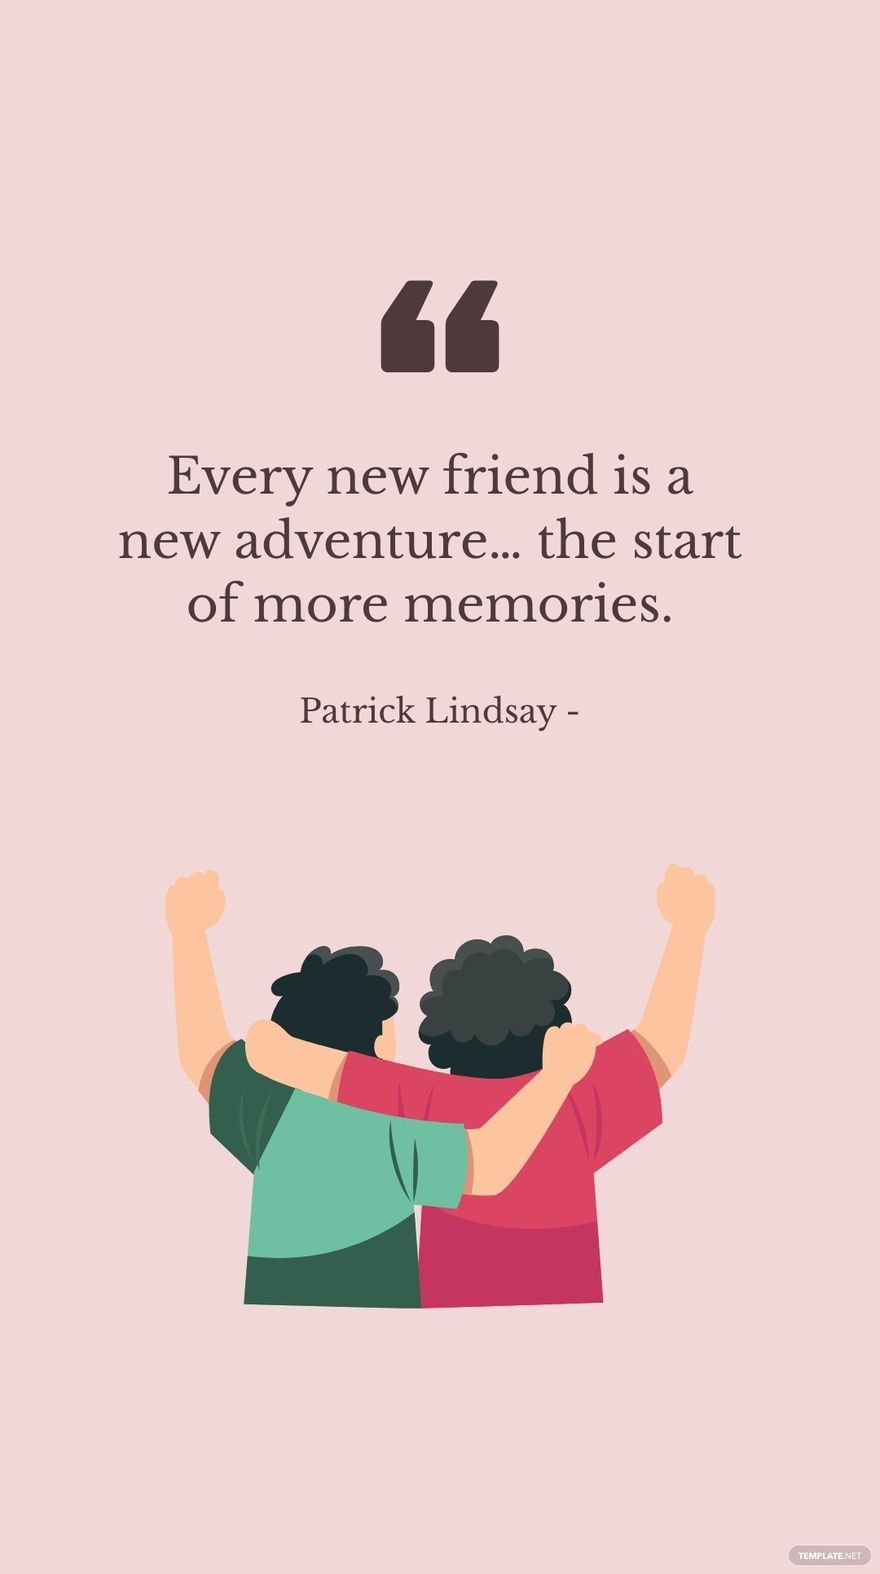 Patrick Lindsay - Every new friend is a new adventure… the start of more memories.